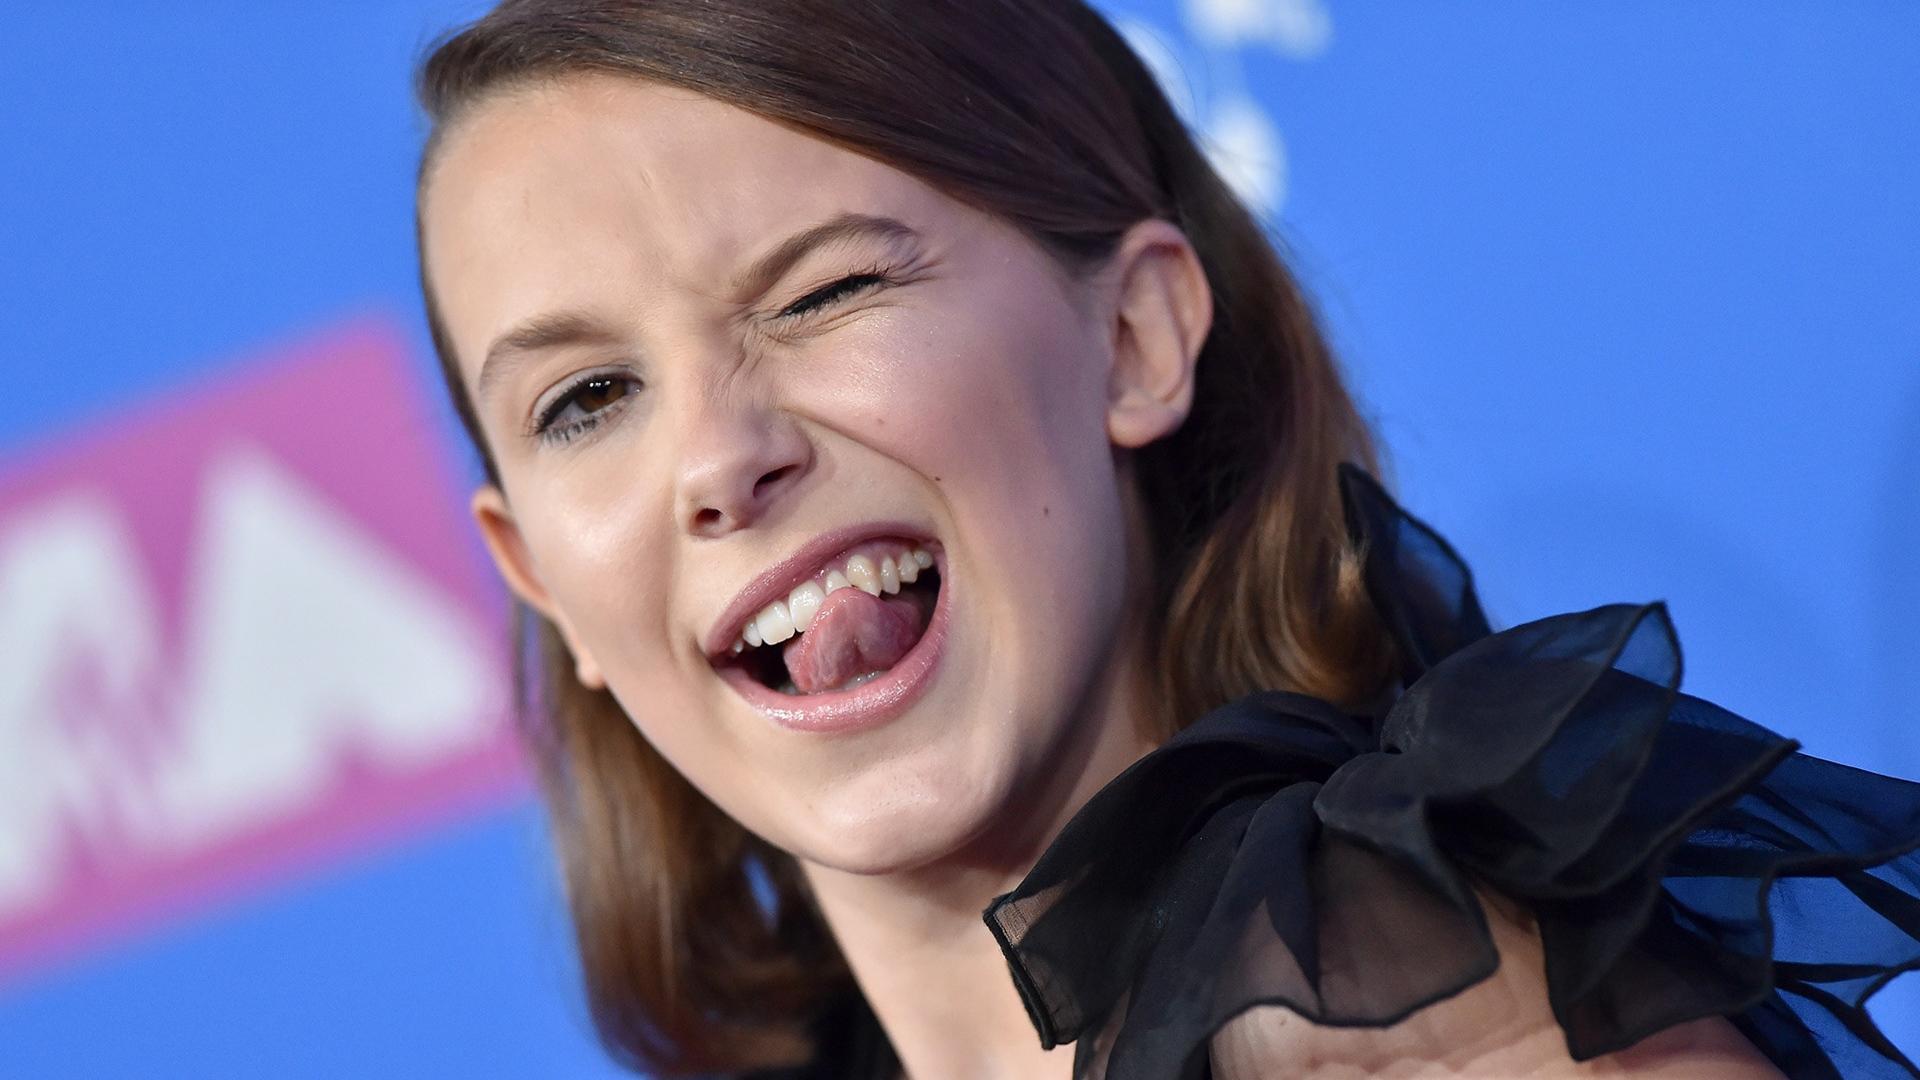 millie bobby brown smiling wallpapers wallpaper cave on millie bobby brown smiling wallpapers